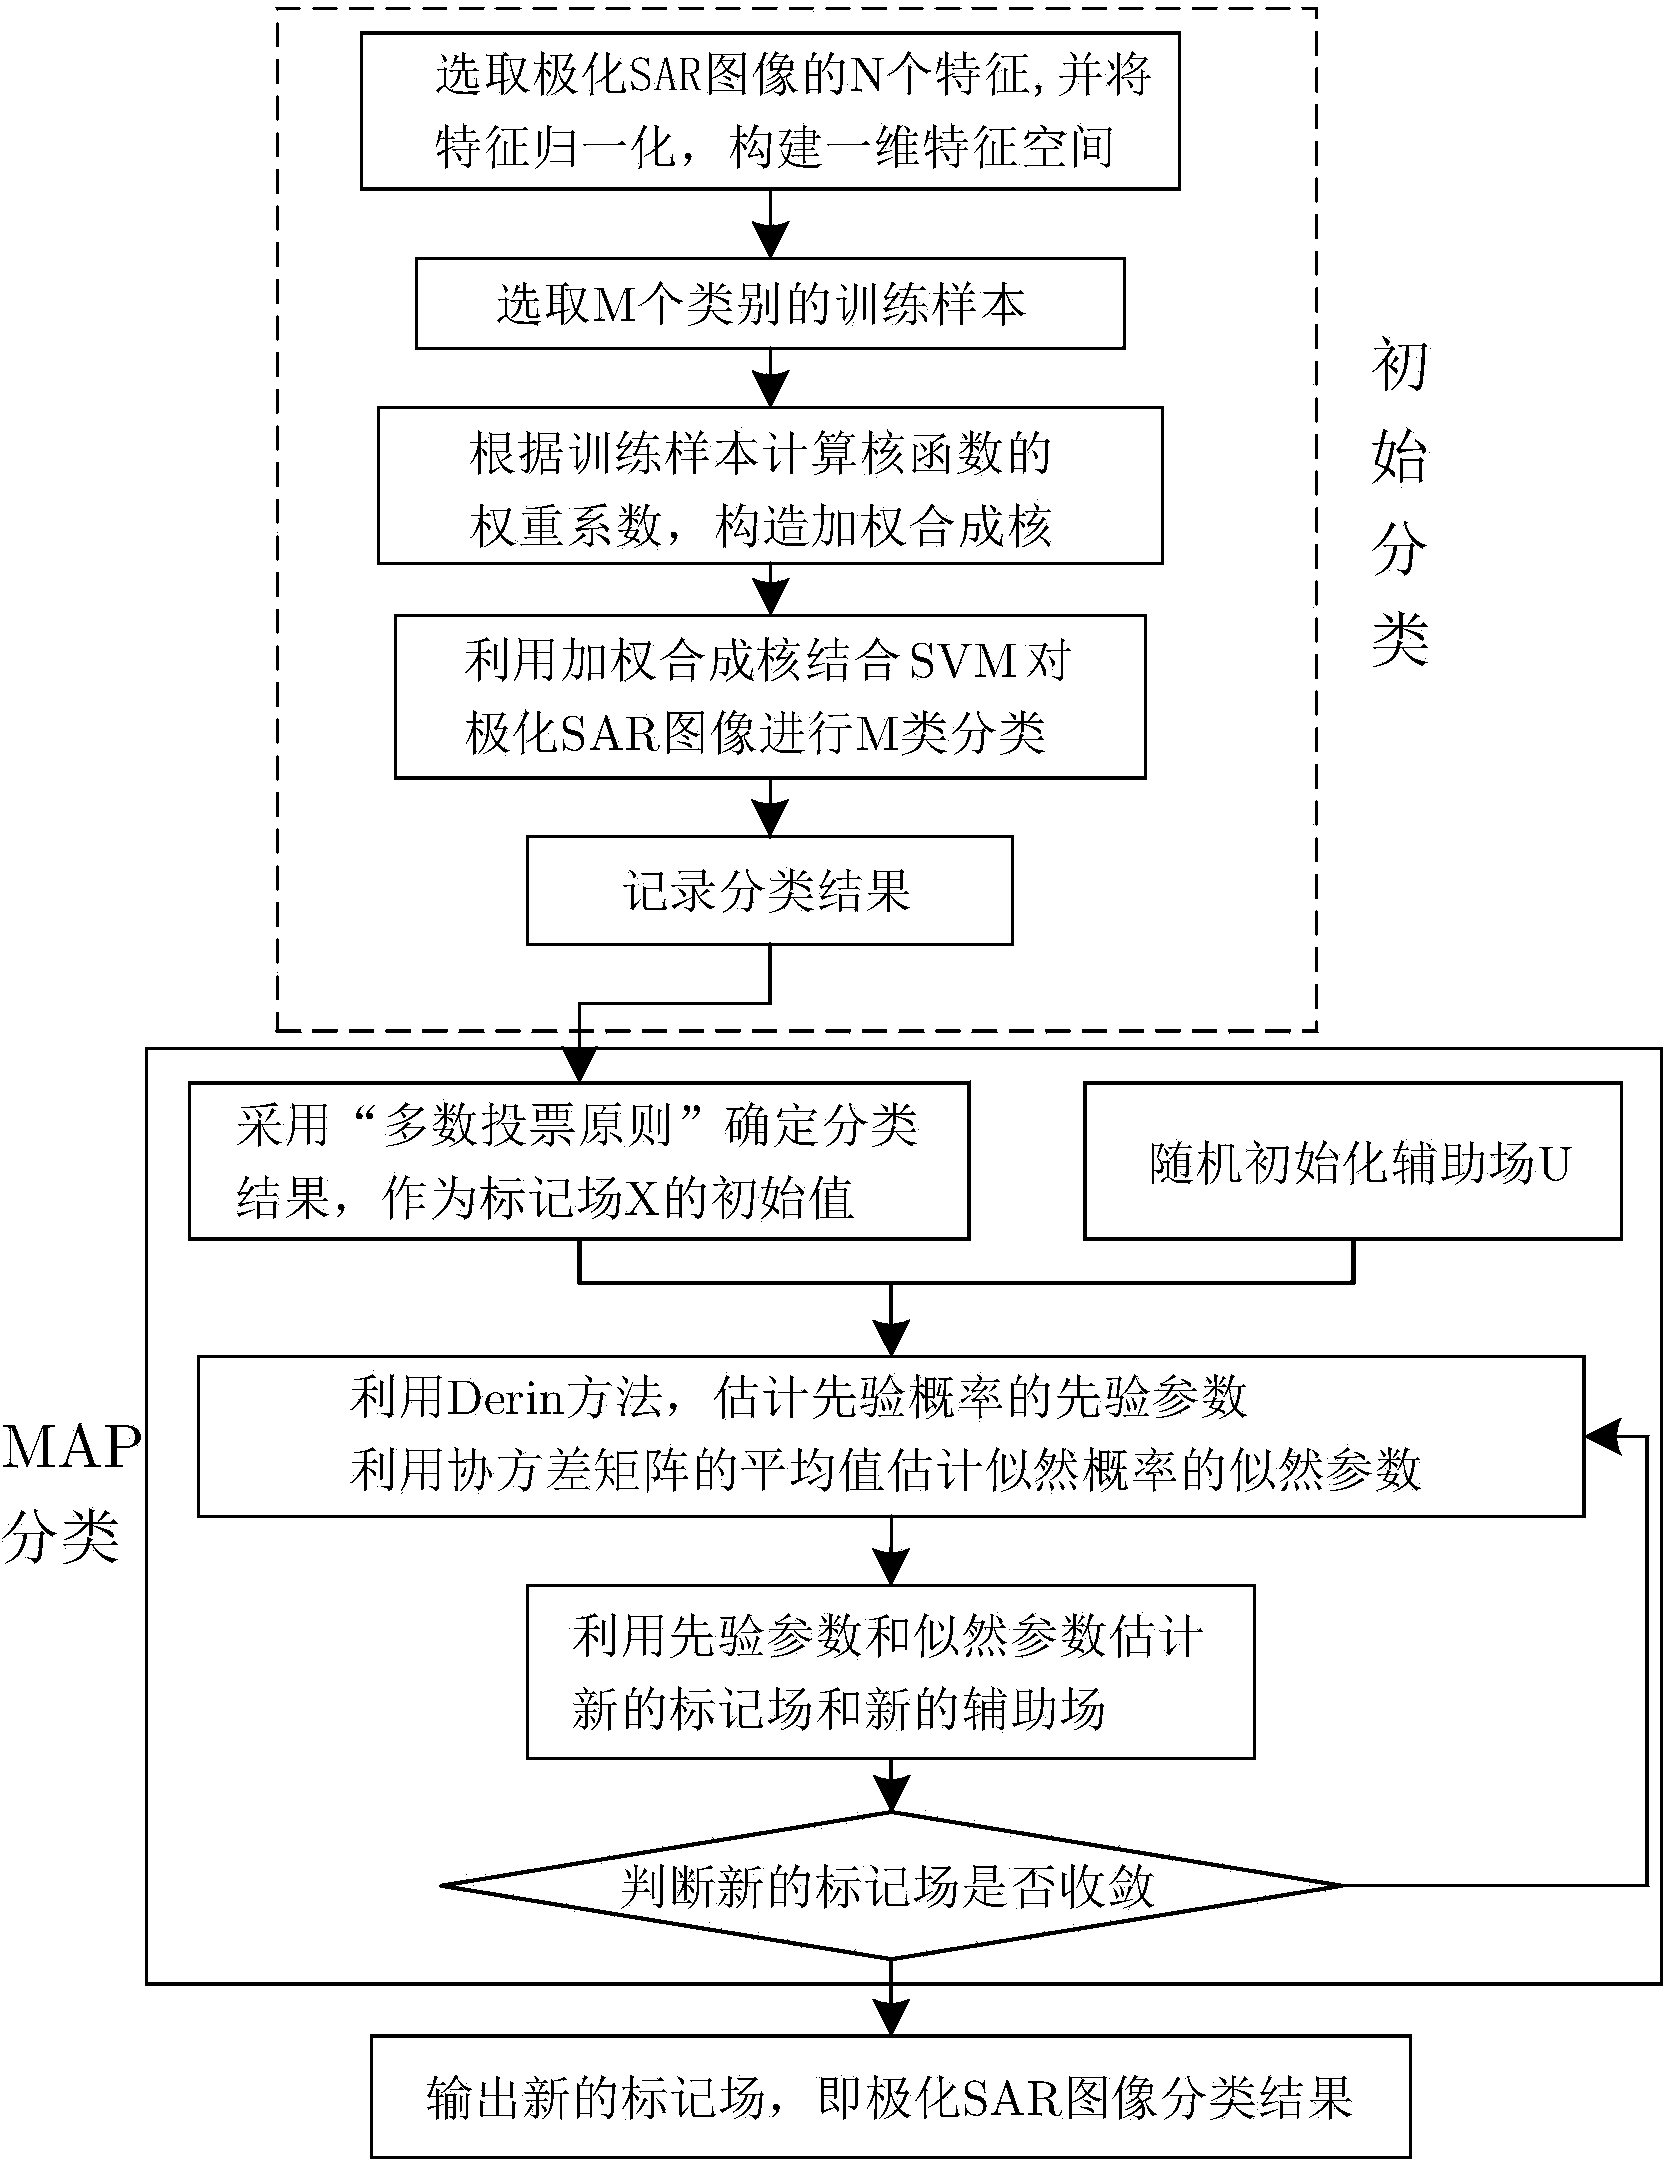 Weighted synthetic kernel and triple markov field (TMF) based polarimetric synthetic aperture radar (SAR) image classification method